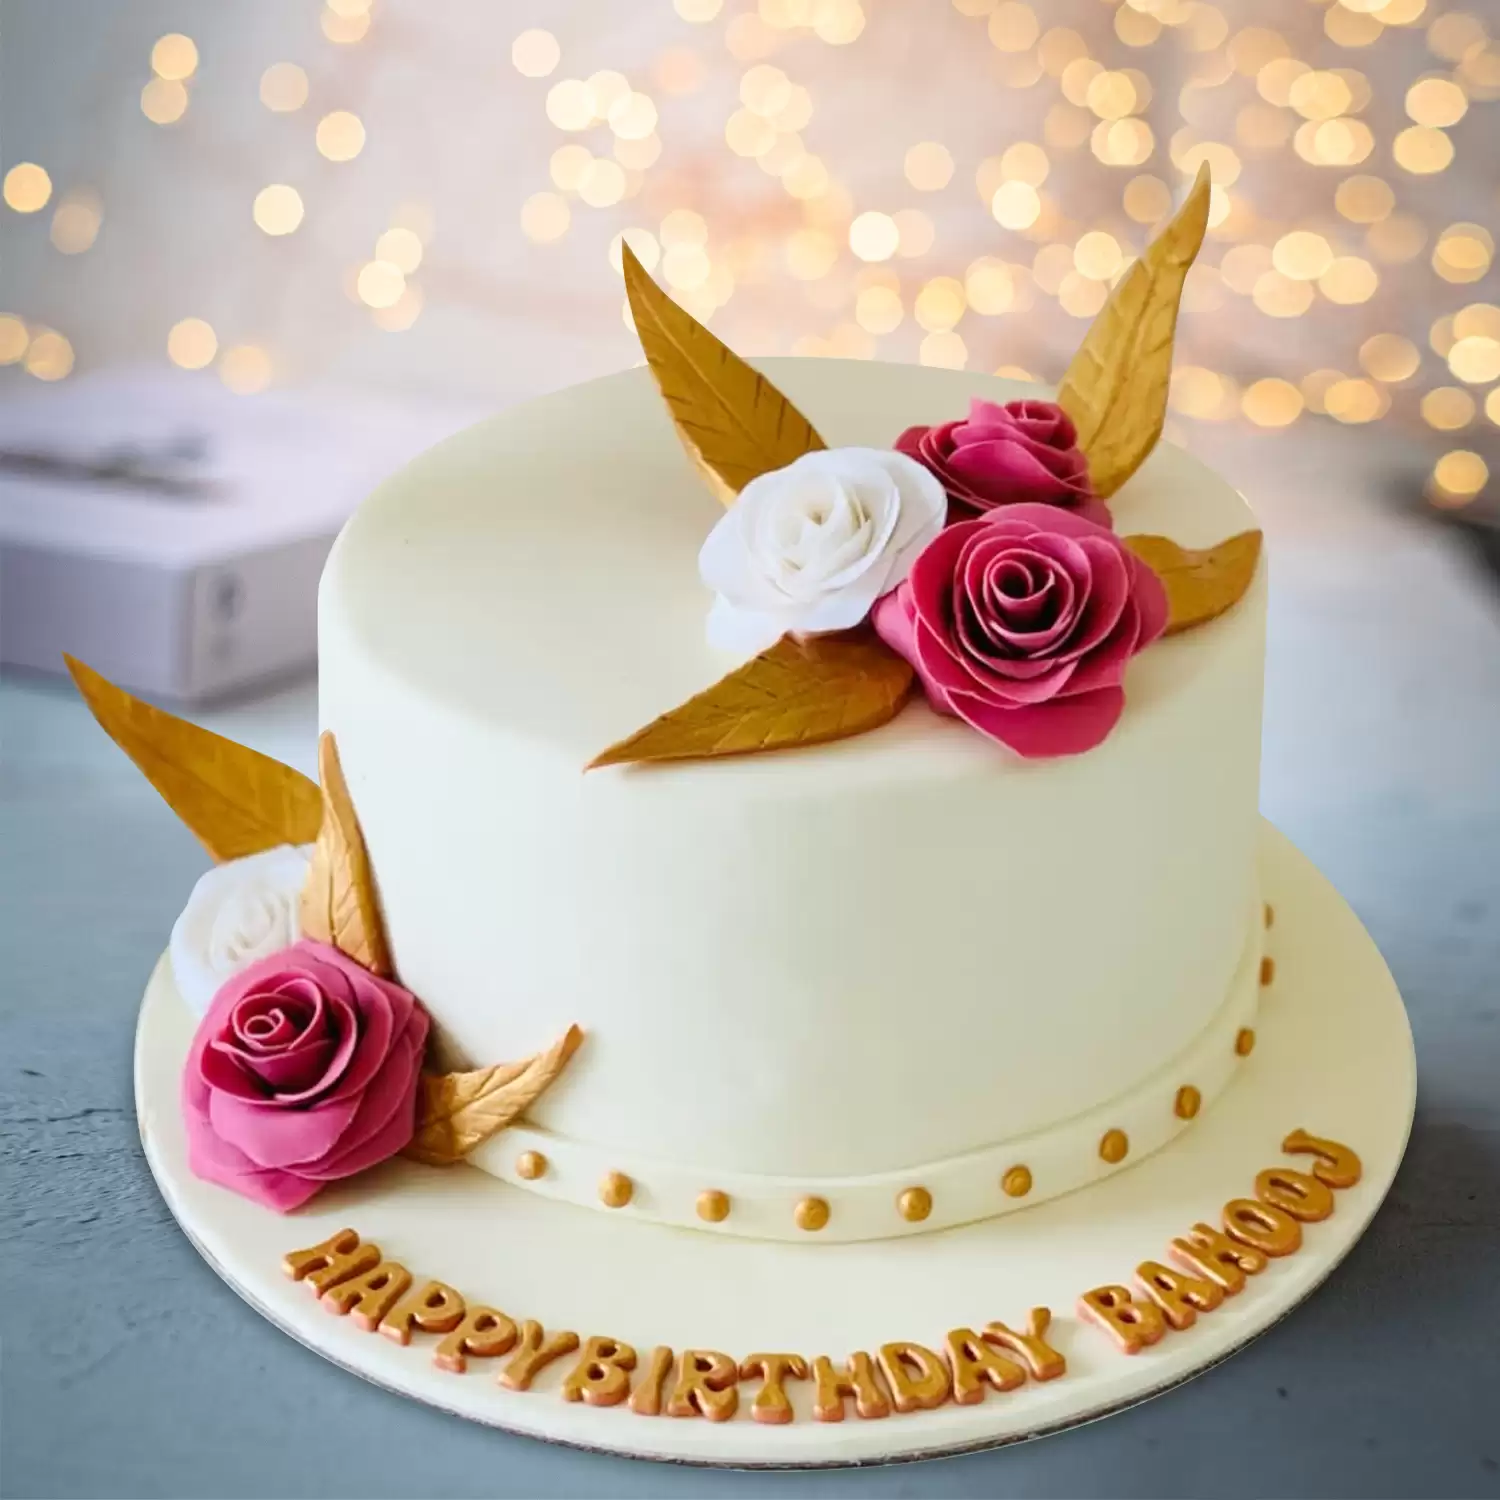 Rose Fondant Cake | Buy Cakes Online | Cakes Delivery In Bahrain - Flora D'lite